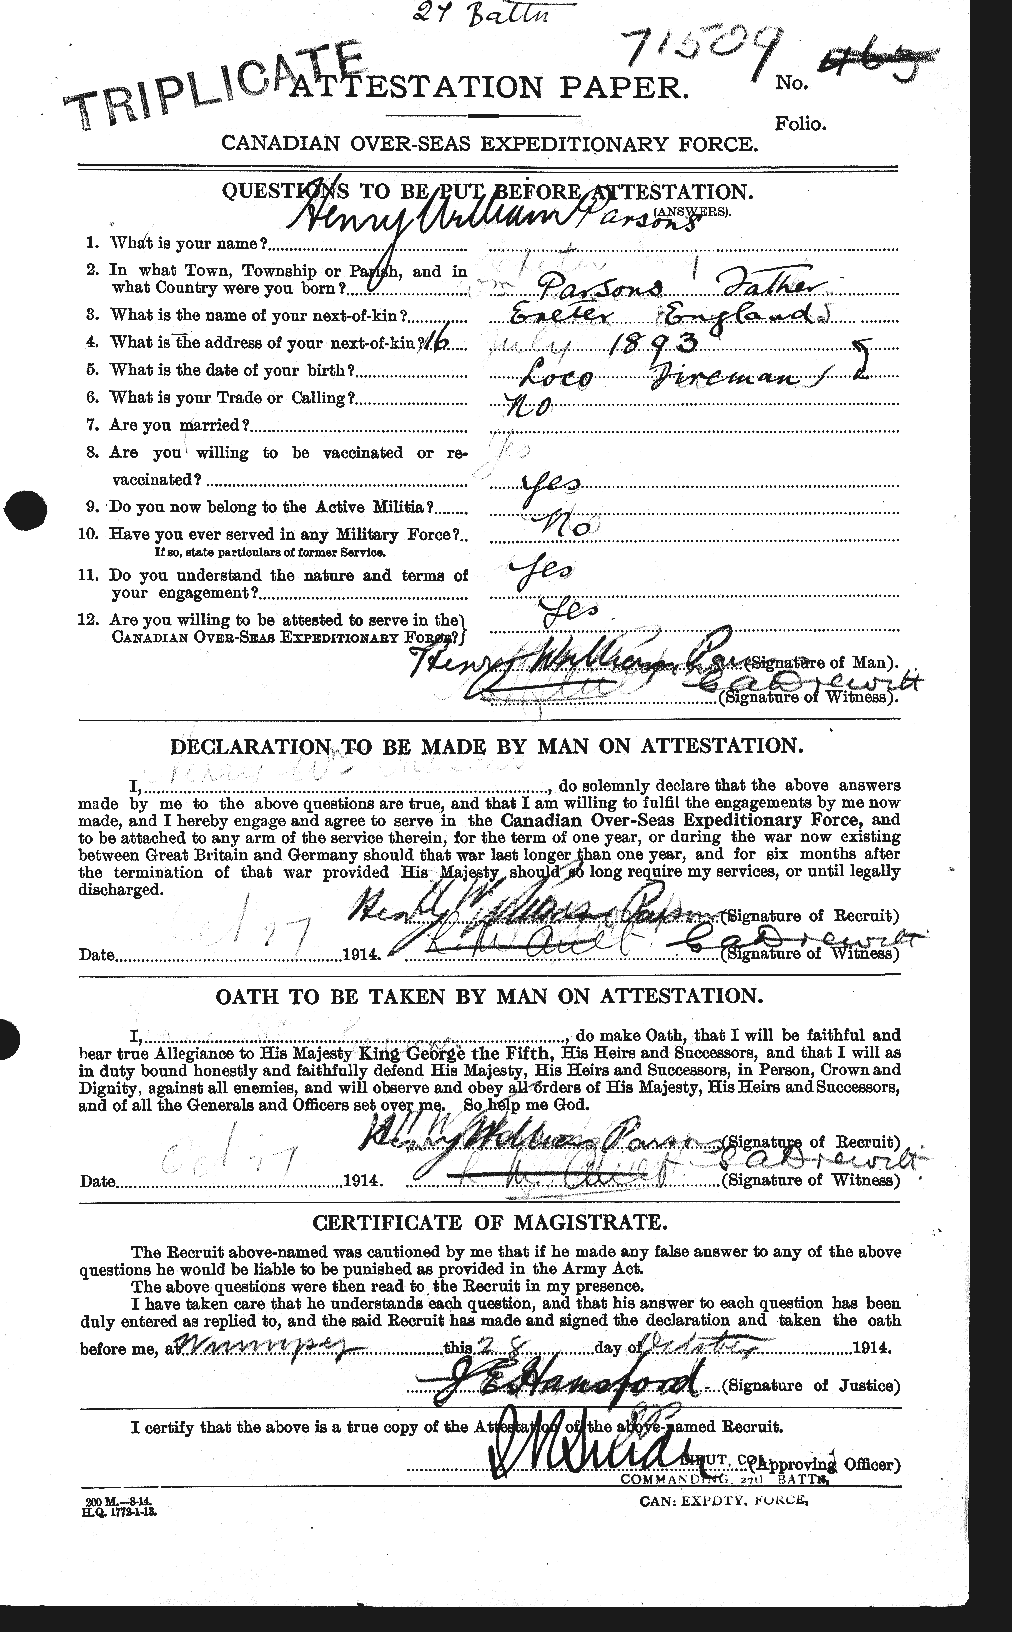 Personnel Records of the First World War - CEF 566892a